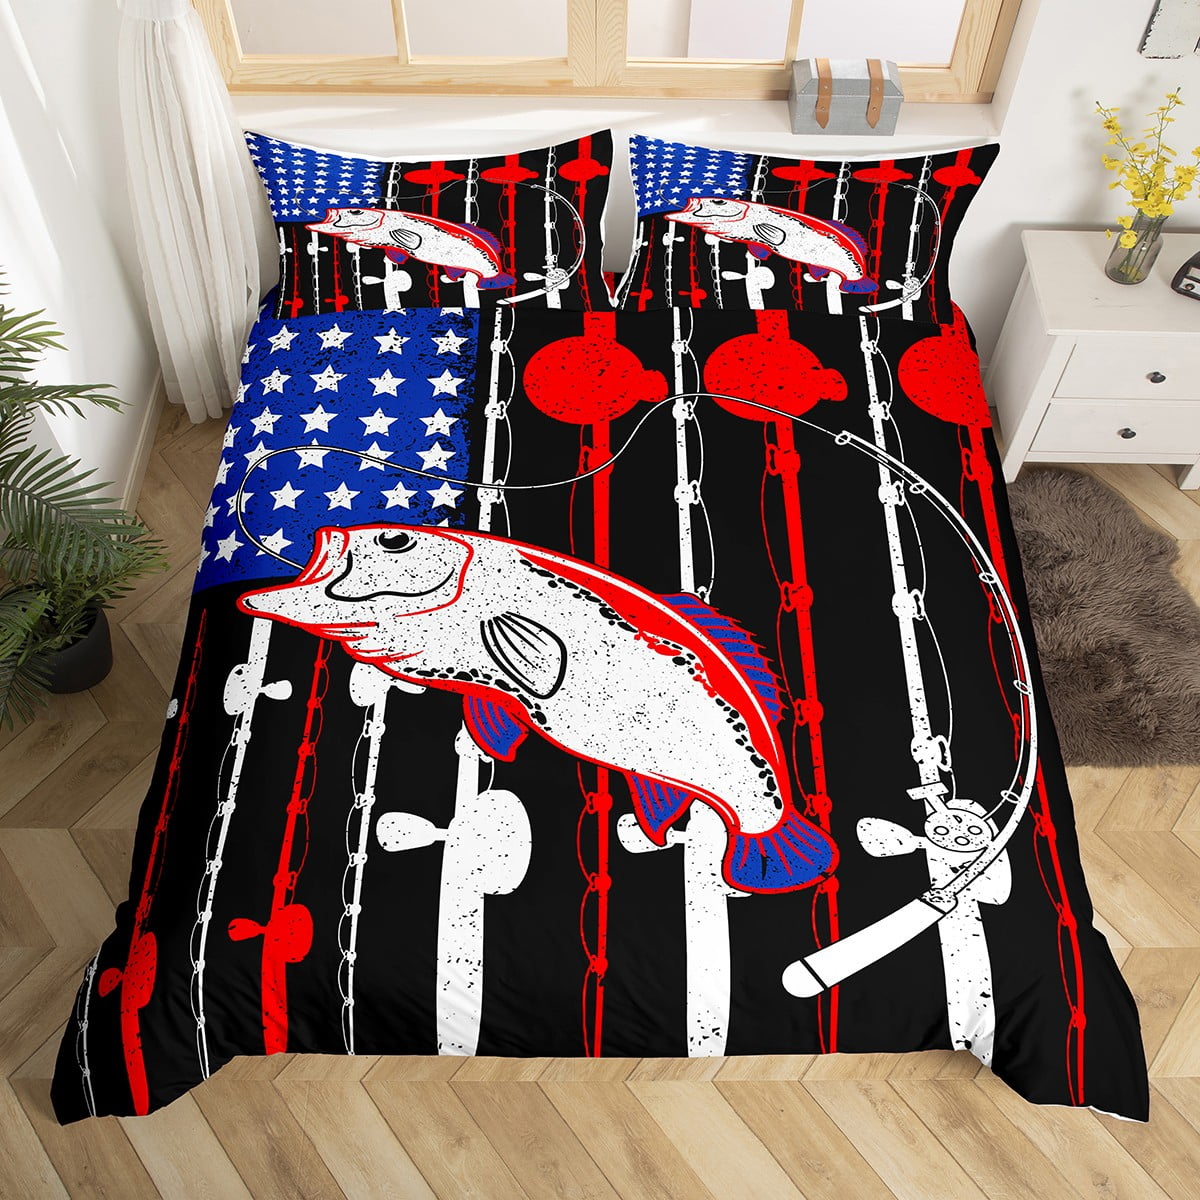 Fishing Rod Duvet Cover United States Flag Fishing Bedding Set for Man Boys, Fish Hook and Line Comforter Cover Fishing Lures Angling King Bed Set,Red  Blue USA National Flag Fishing Line Room Decor 